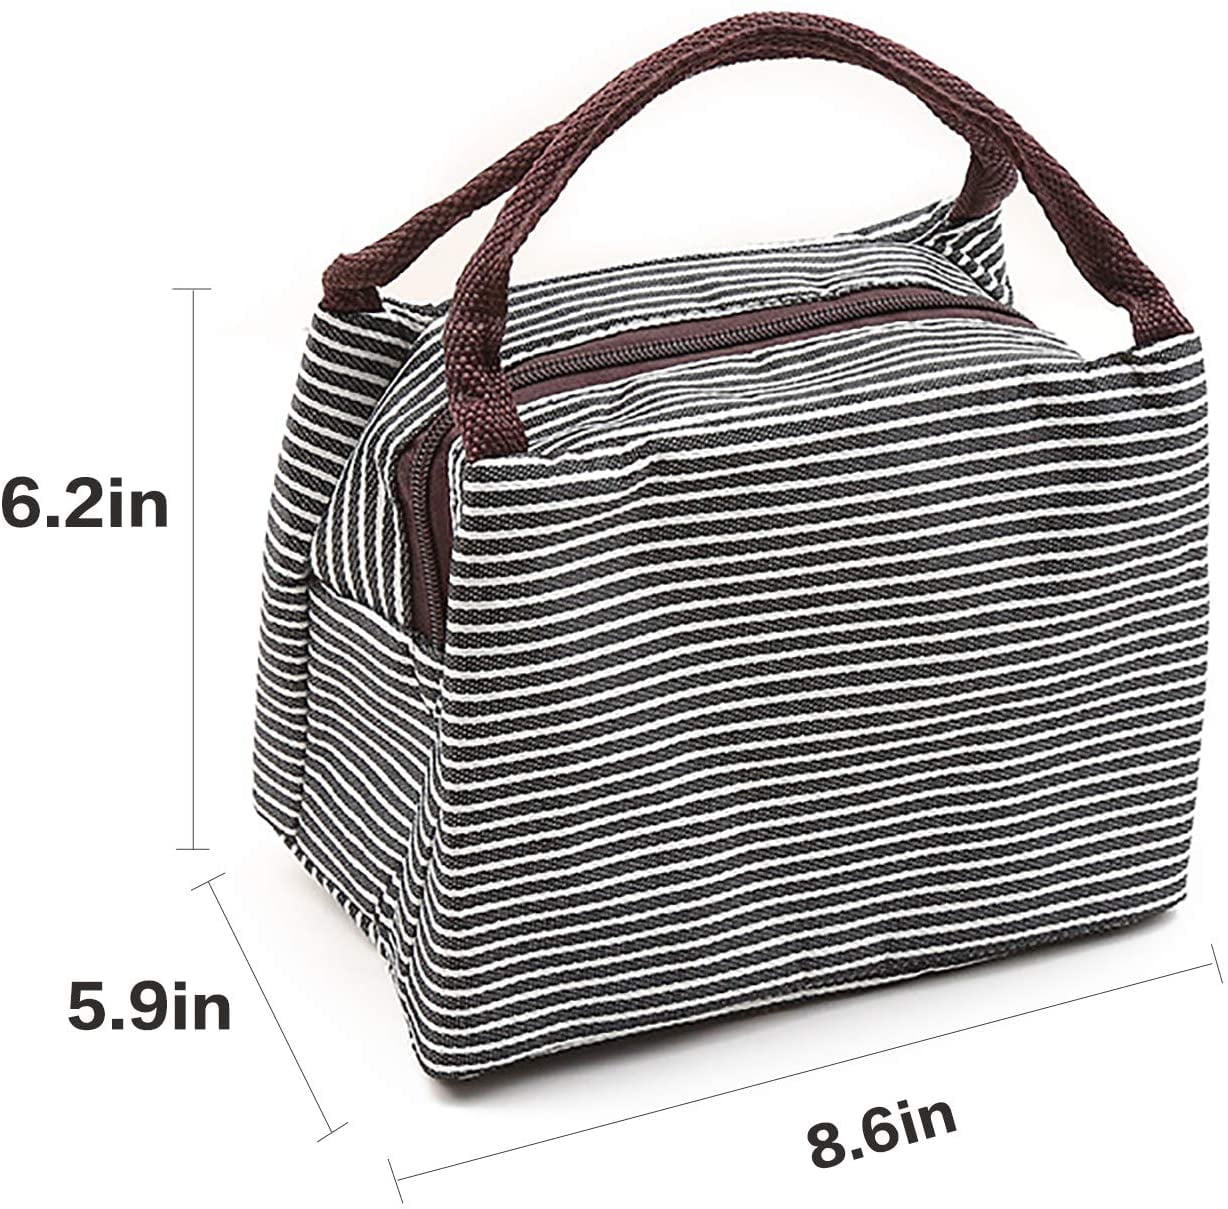 Details about   Adult Womens Girl Portable Insulated Lunch Bag Box Picnic Tote Thermal Shopping 